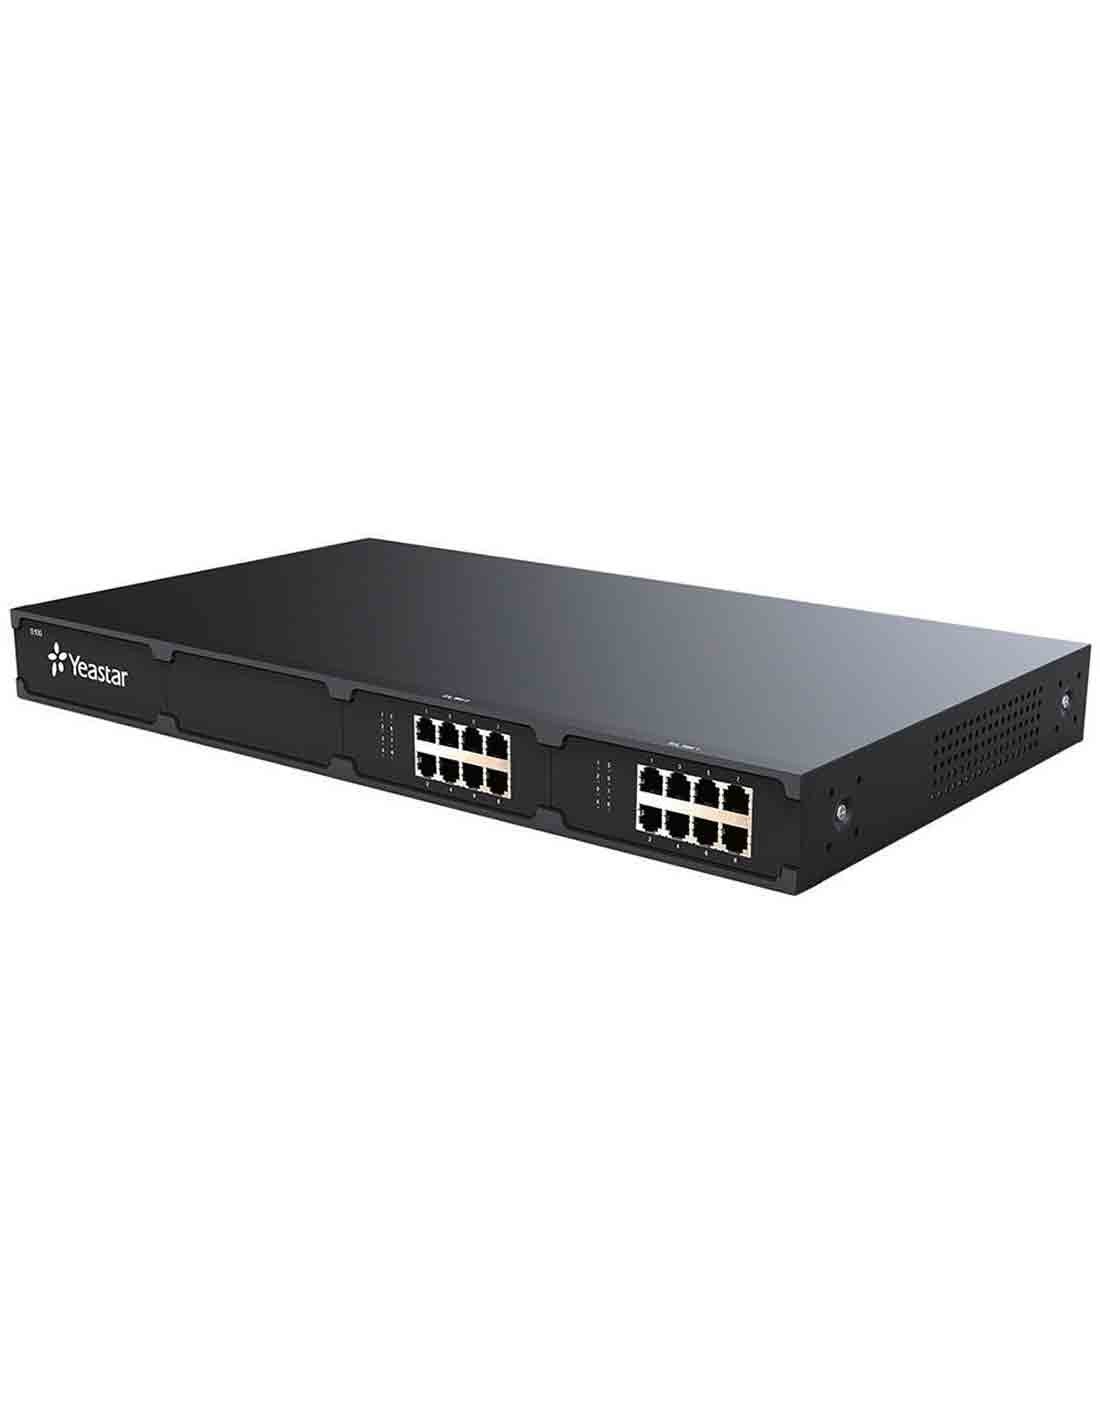 Yeastar S100 VoIP PBX Images is a powerful business communication system